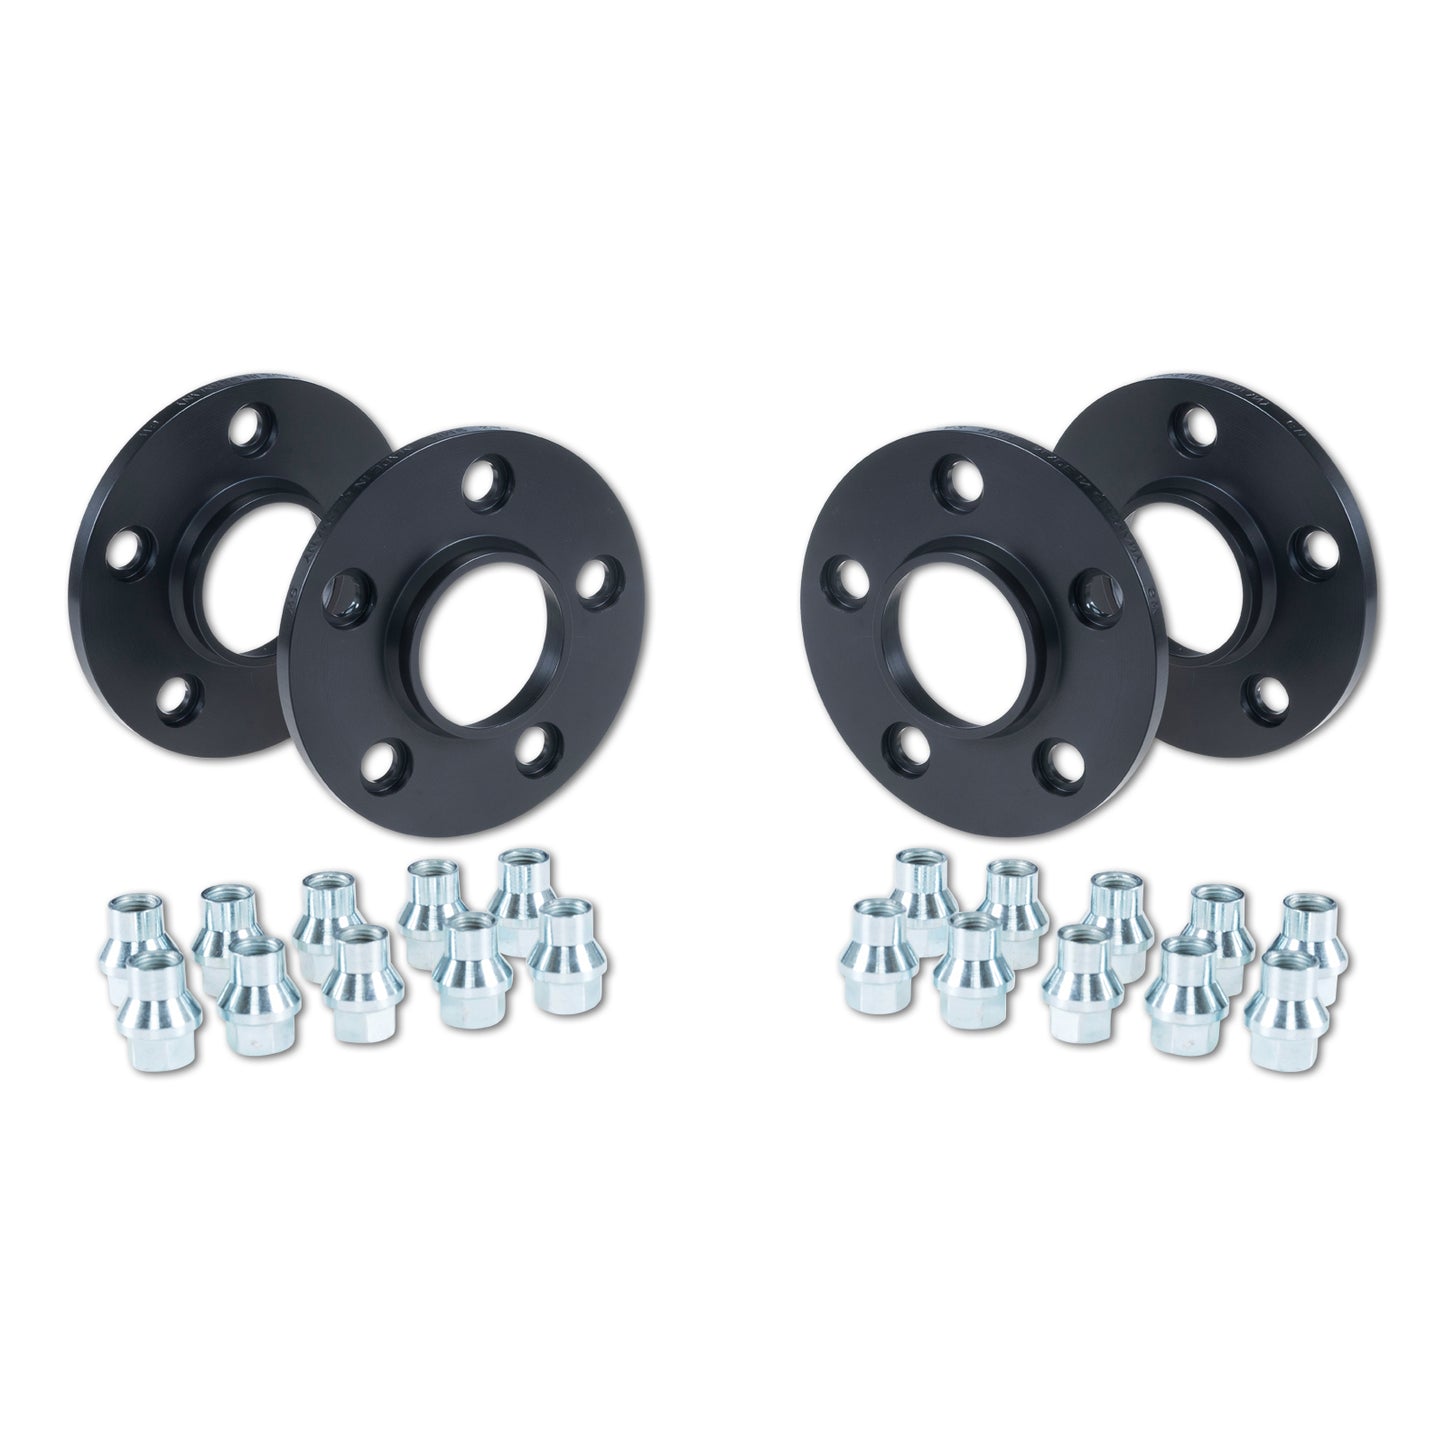 ST Suspensions Easy Fit Wheel Spacer Kit - Ford Mustang (S550) 56012013